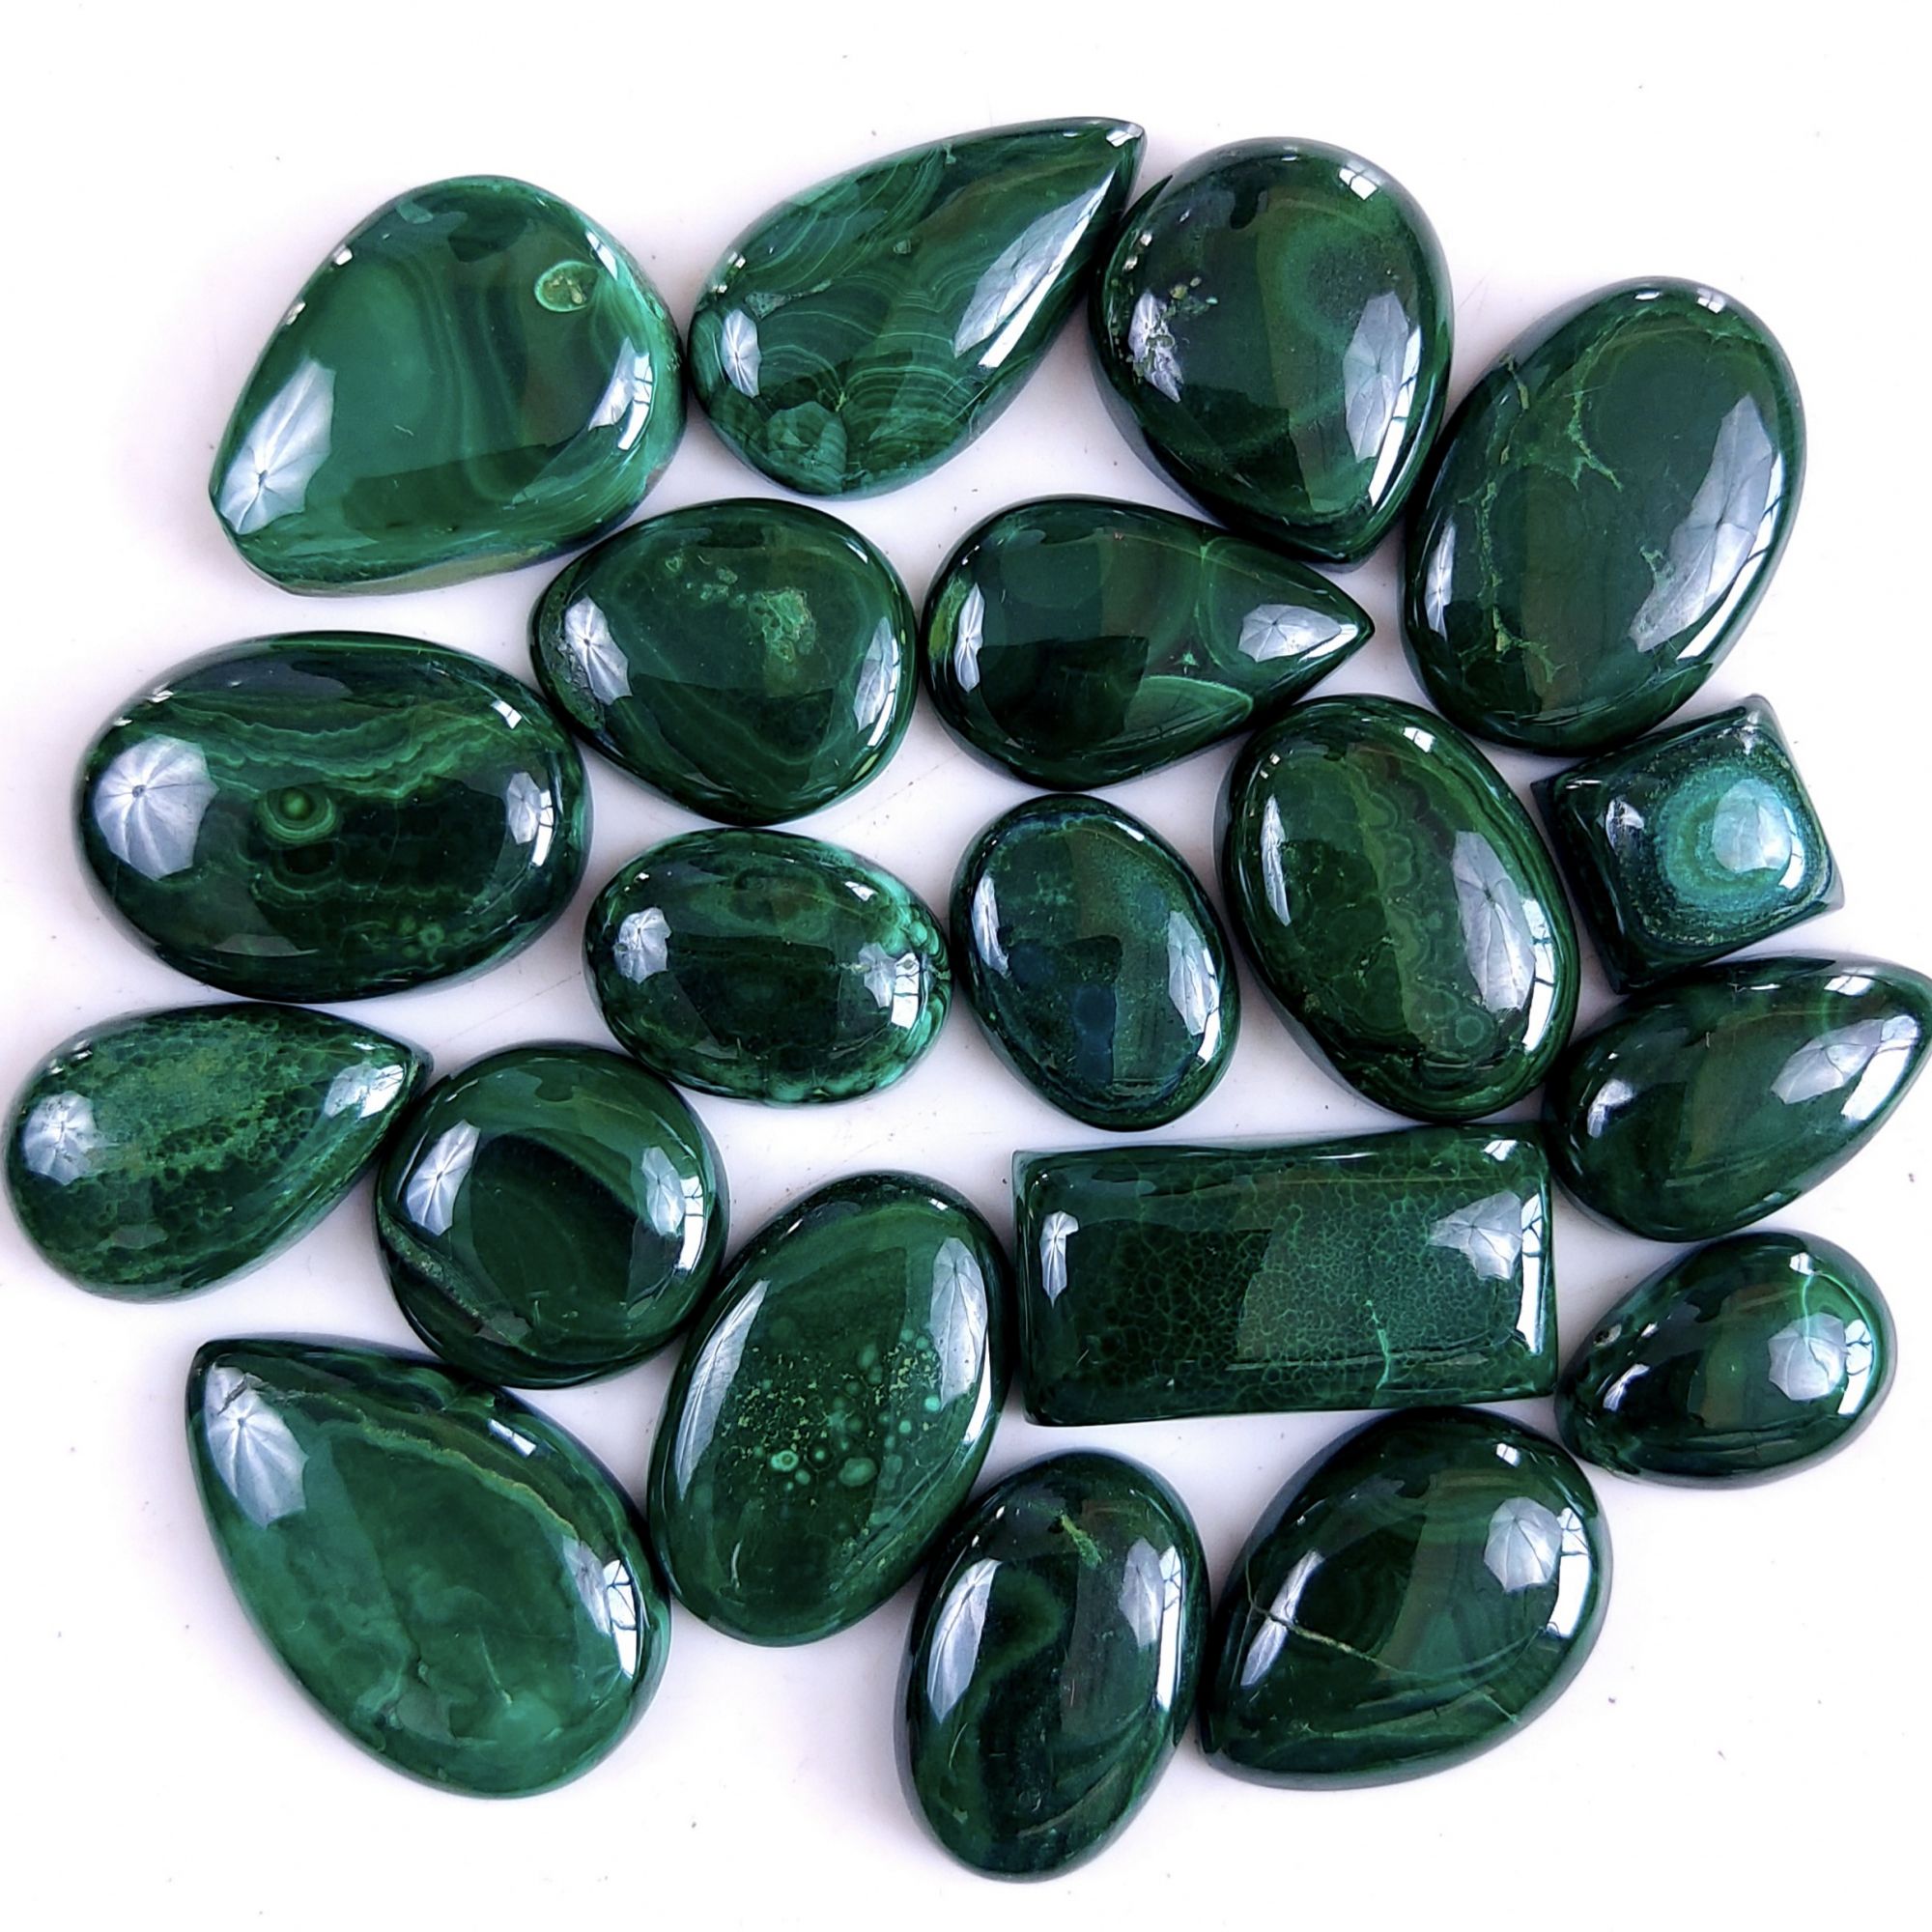 20Pcs 368Cts Natural Green Malachite Flat Back Loose Cabochon Gemstone For Handmade Jewelry Making and Craft Supplies 20x14 8x8mm#9335